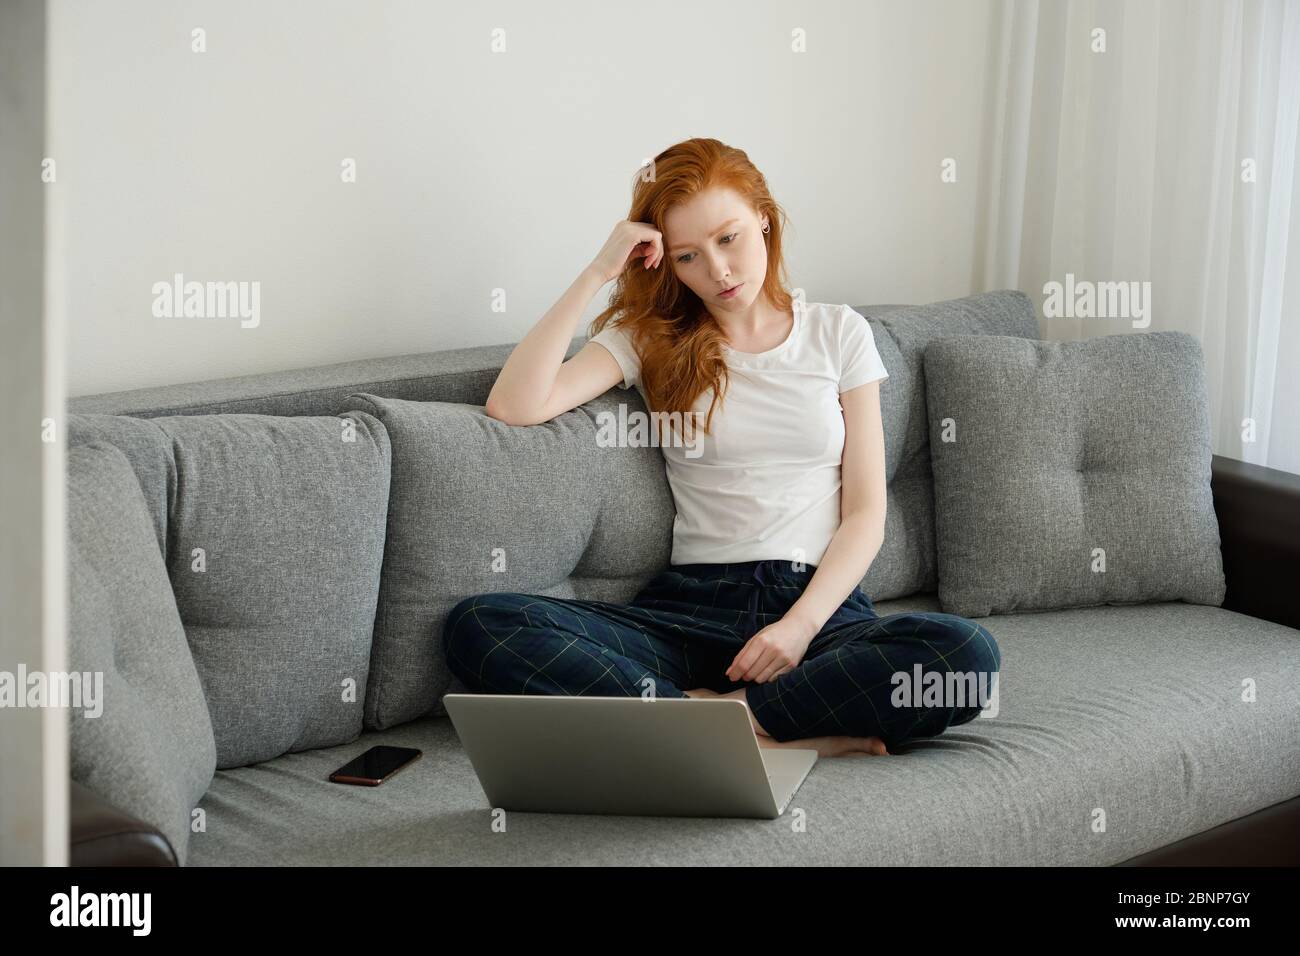 A red-haired girl in home clothes sits cross-legged on the couch and looks tiredly at the laptop in front of her Stock Photo